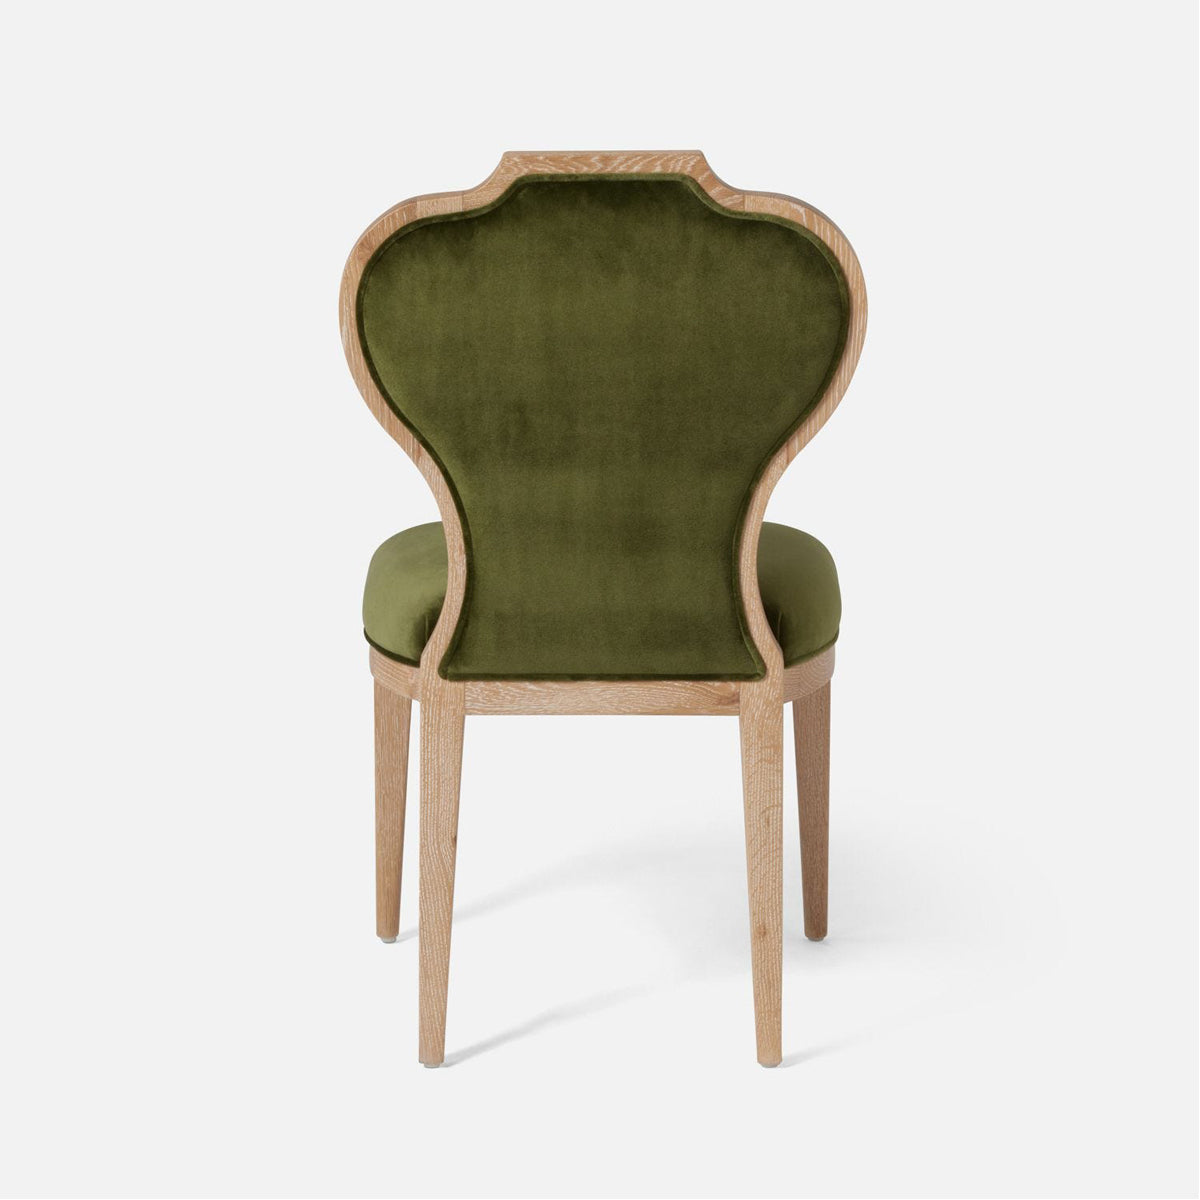 Made Goods Joanna Dining Chair in Ettrick Cotton Jute